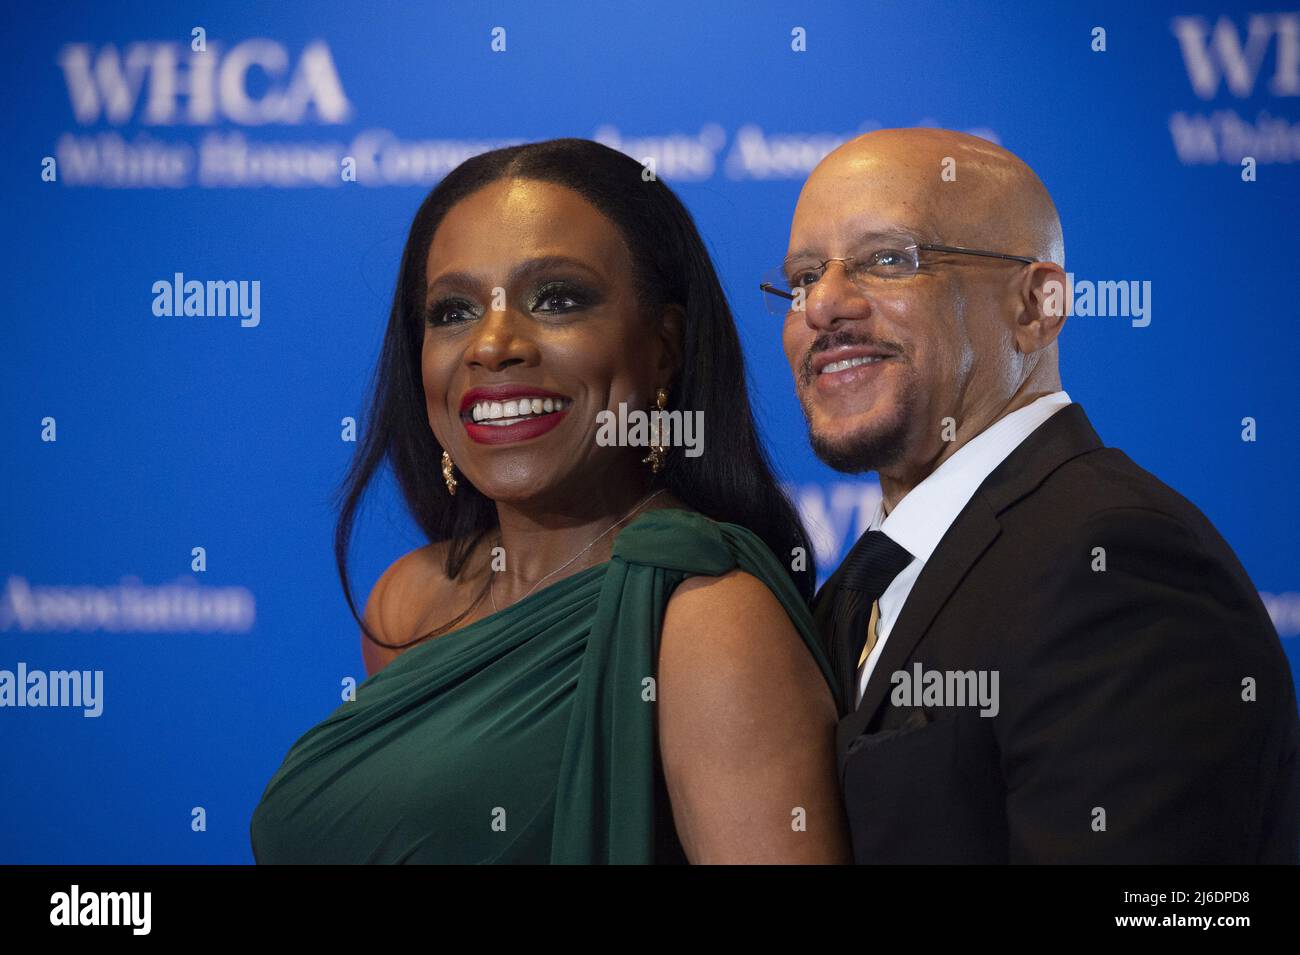 Actress Sheryl Lee Ralph and husband, Pennsylvania State Senator Vincent Hughes arrive at the 2022 White House Correspondents' Association Dinner at the Washington Hilton in Washington, DC on Saturday, April 30, 2022. The dinner is back this year for the first time since 2019. Photo by Bonnie Cash/UPI.... . Stock Photo